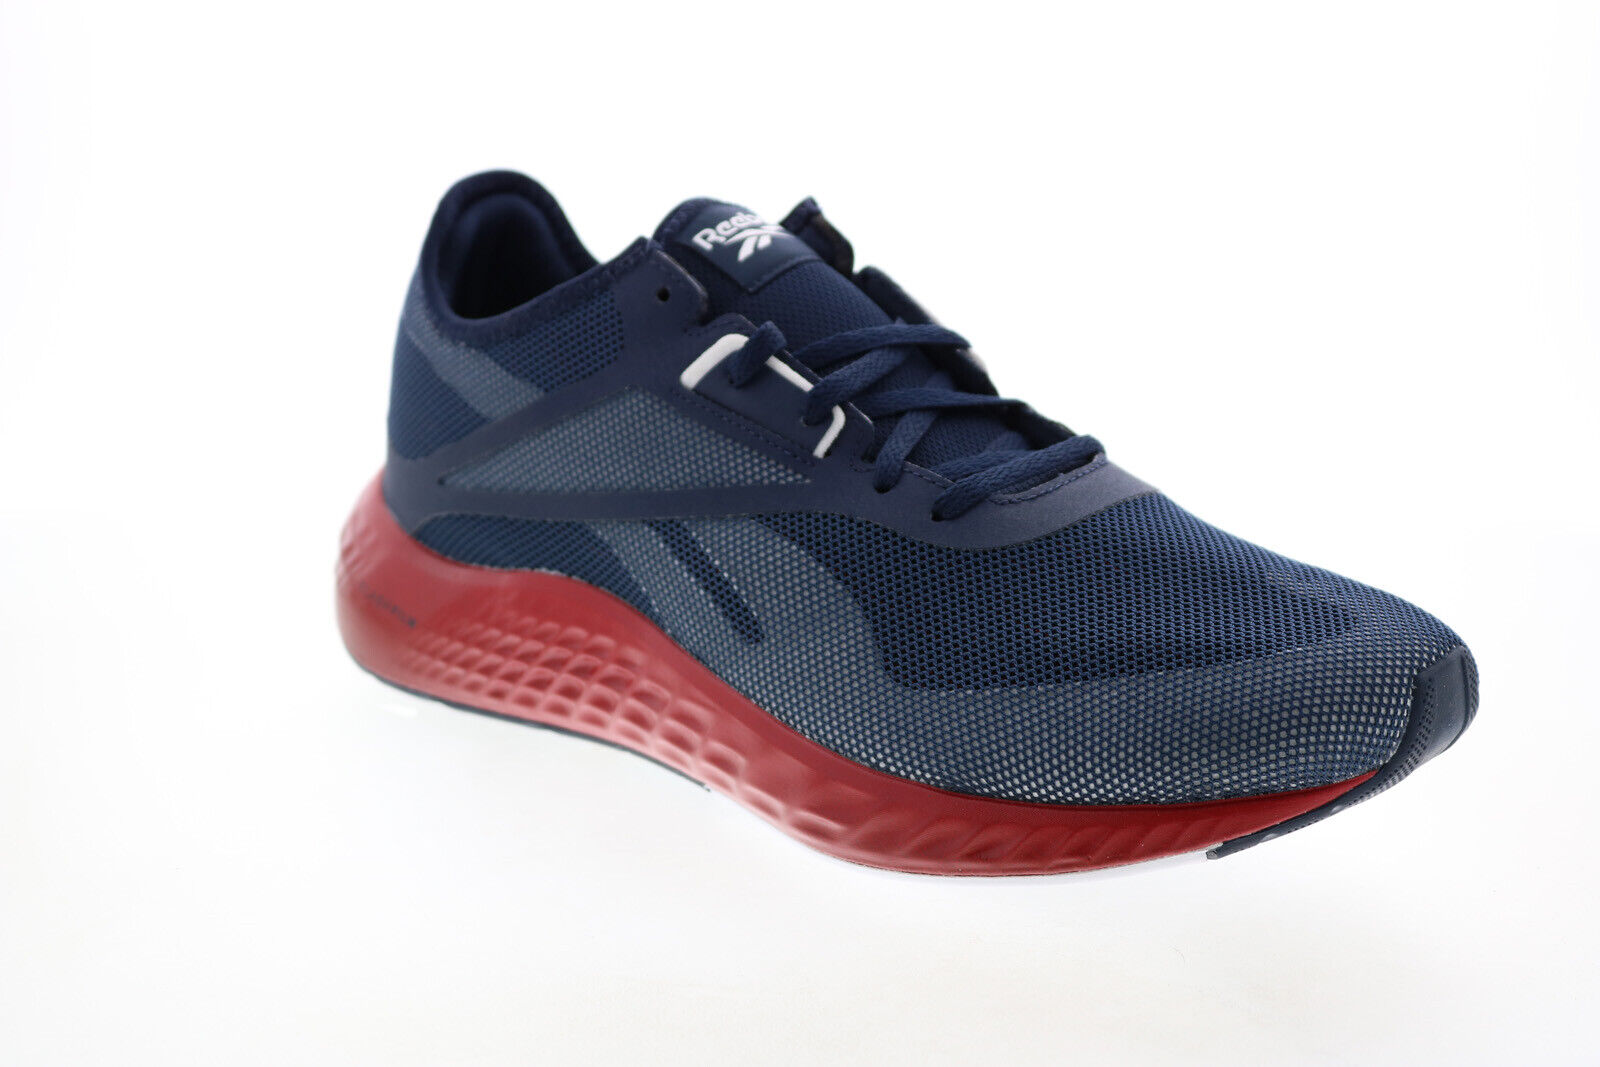 Reebok Flashfilm 3.0 G57587 Mens Blue Canvas Lace Up Athletic Running Shoes